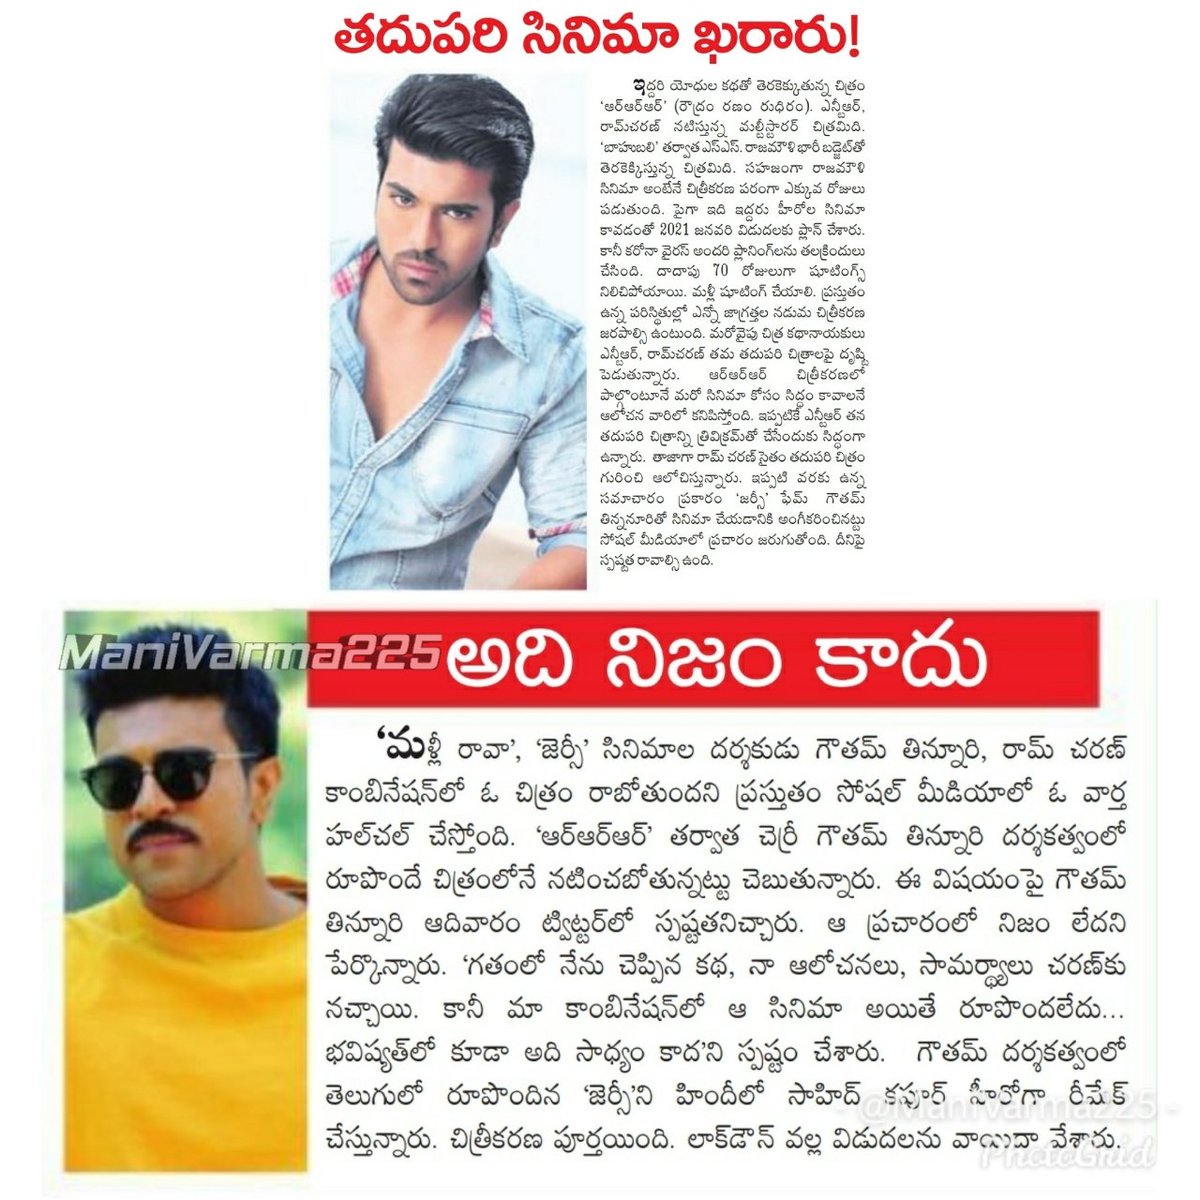 Today's articles about #RC15 (after #RRR)

About Combo of 
#RamCharan - #GowthamTinnanuri

Andhra Prabhas Says Yes
Praja Sakthi Says No 😂🙏🏻

Don't believe buzz unless an official confirmation comes from Mega Compound 😎